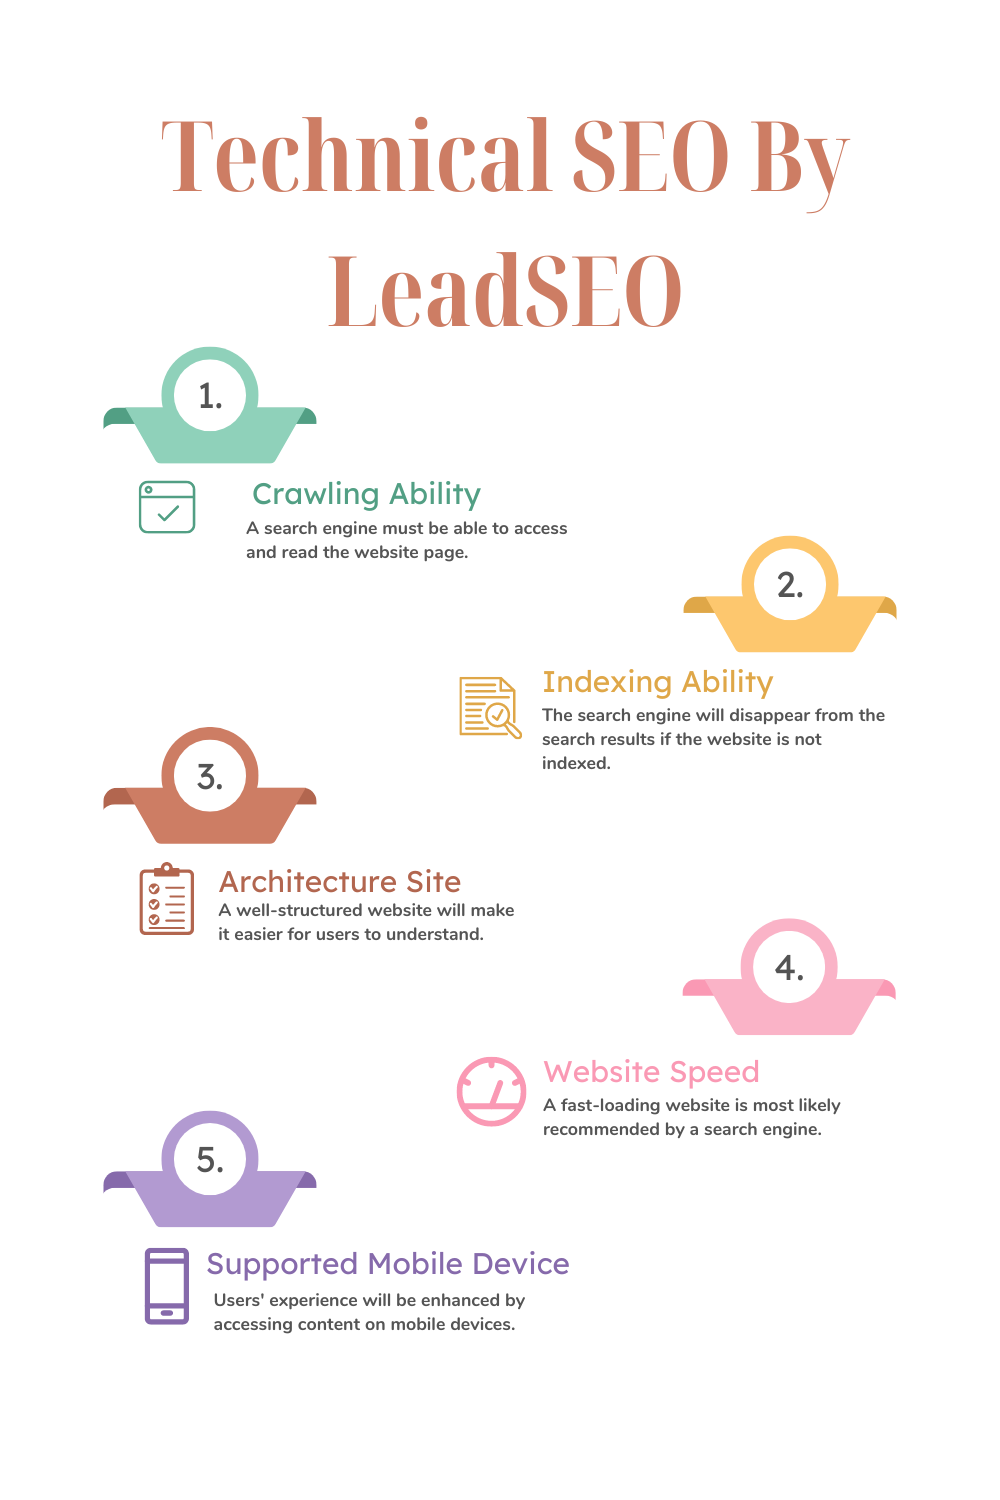 Technical SEO By LeadSEO